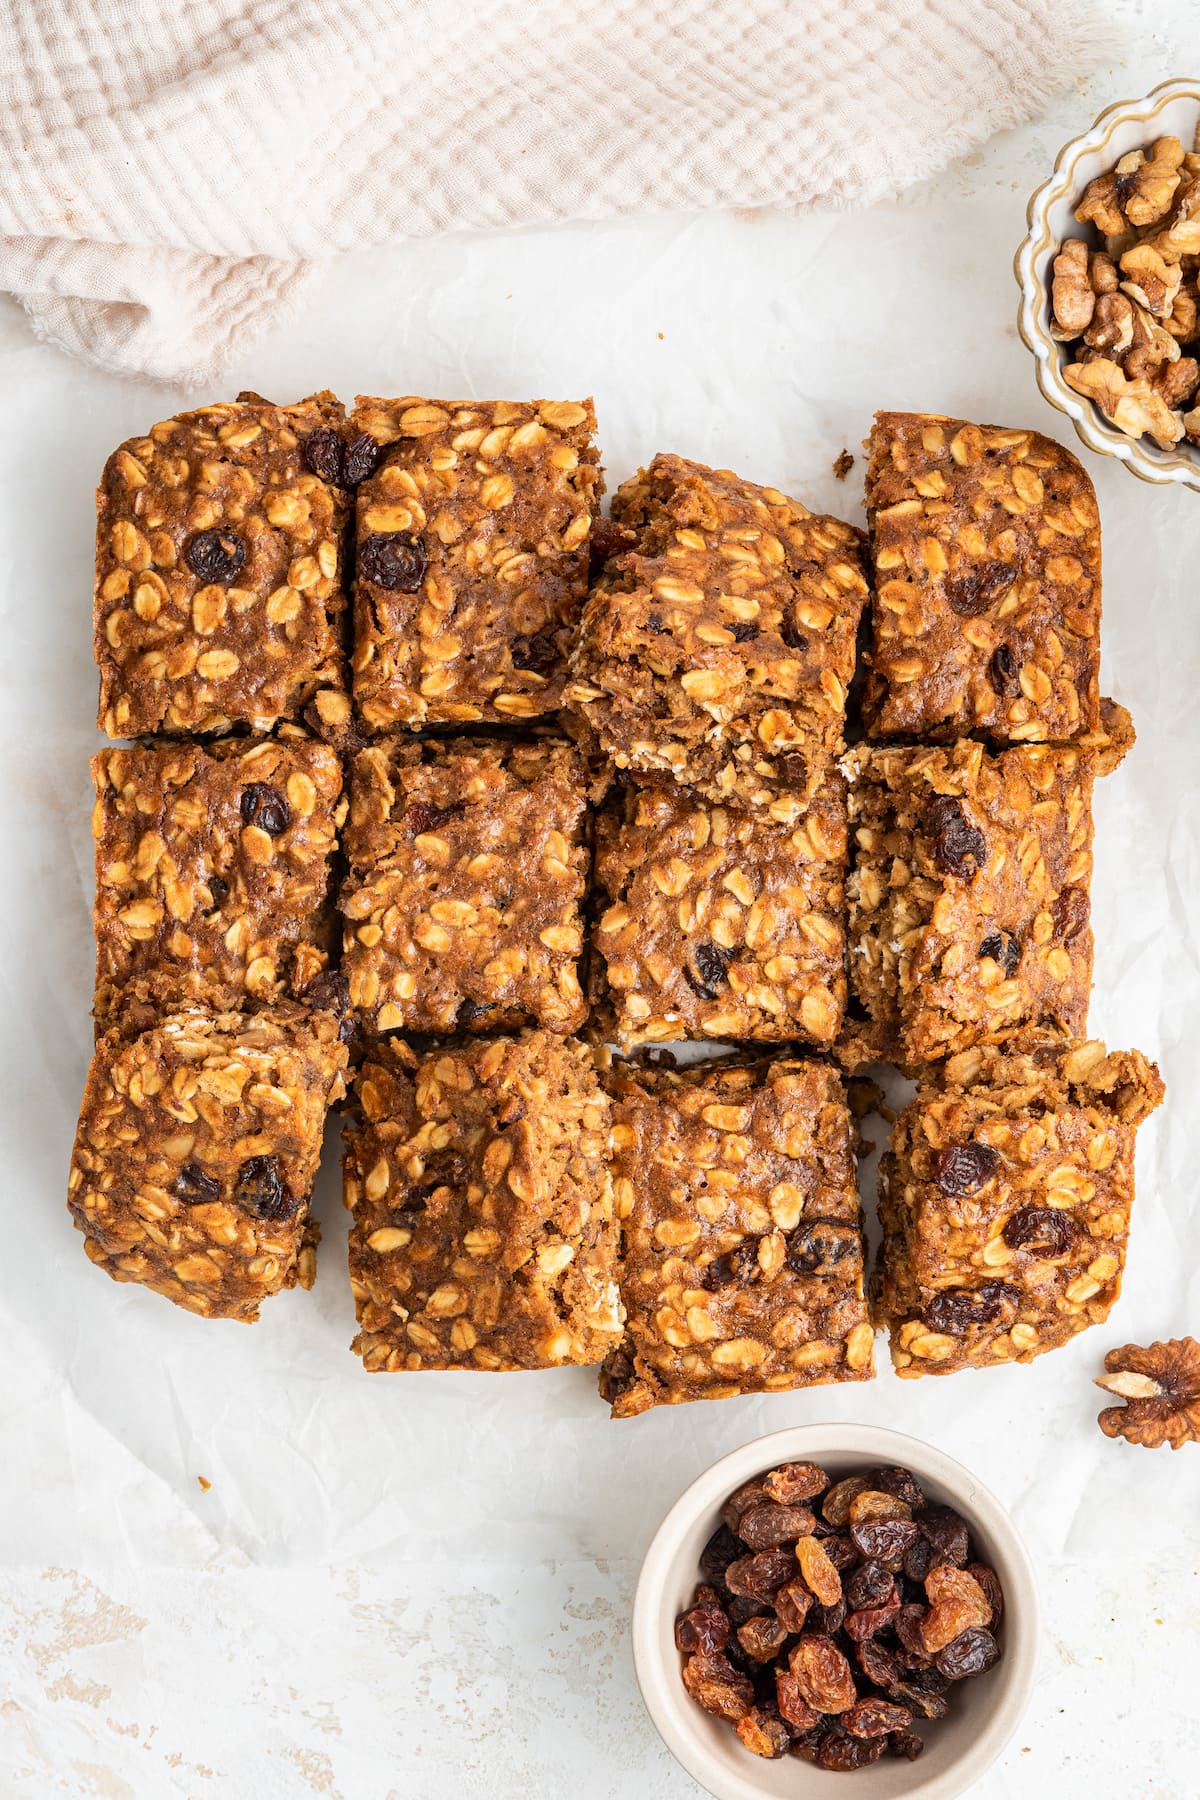 Twelve healthy banana oat bars close together on the counter.